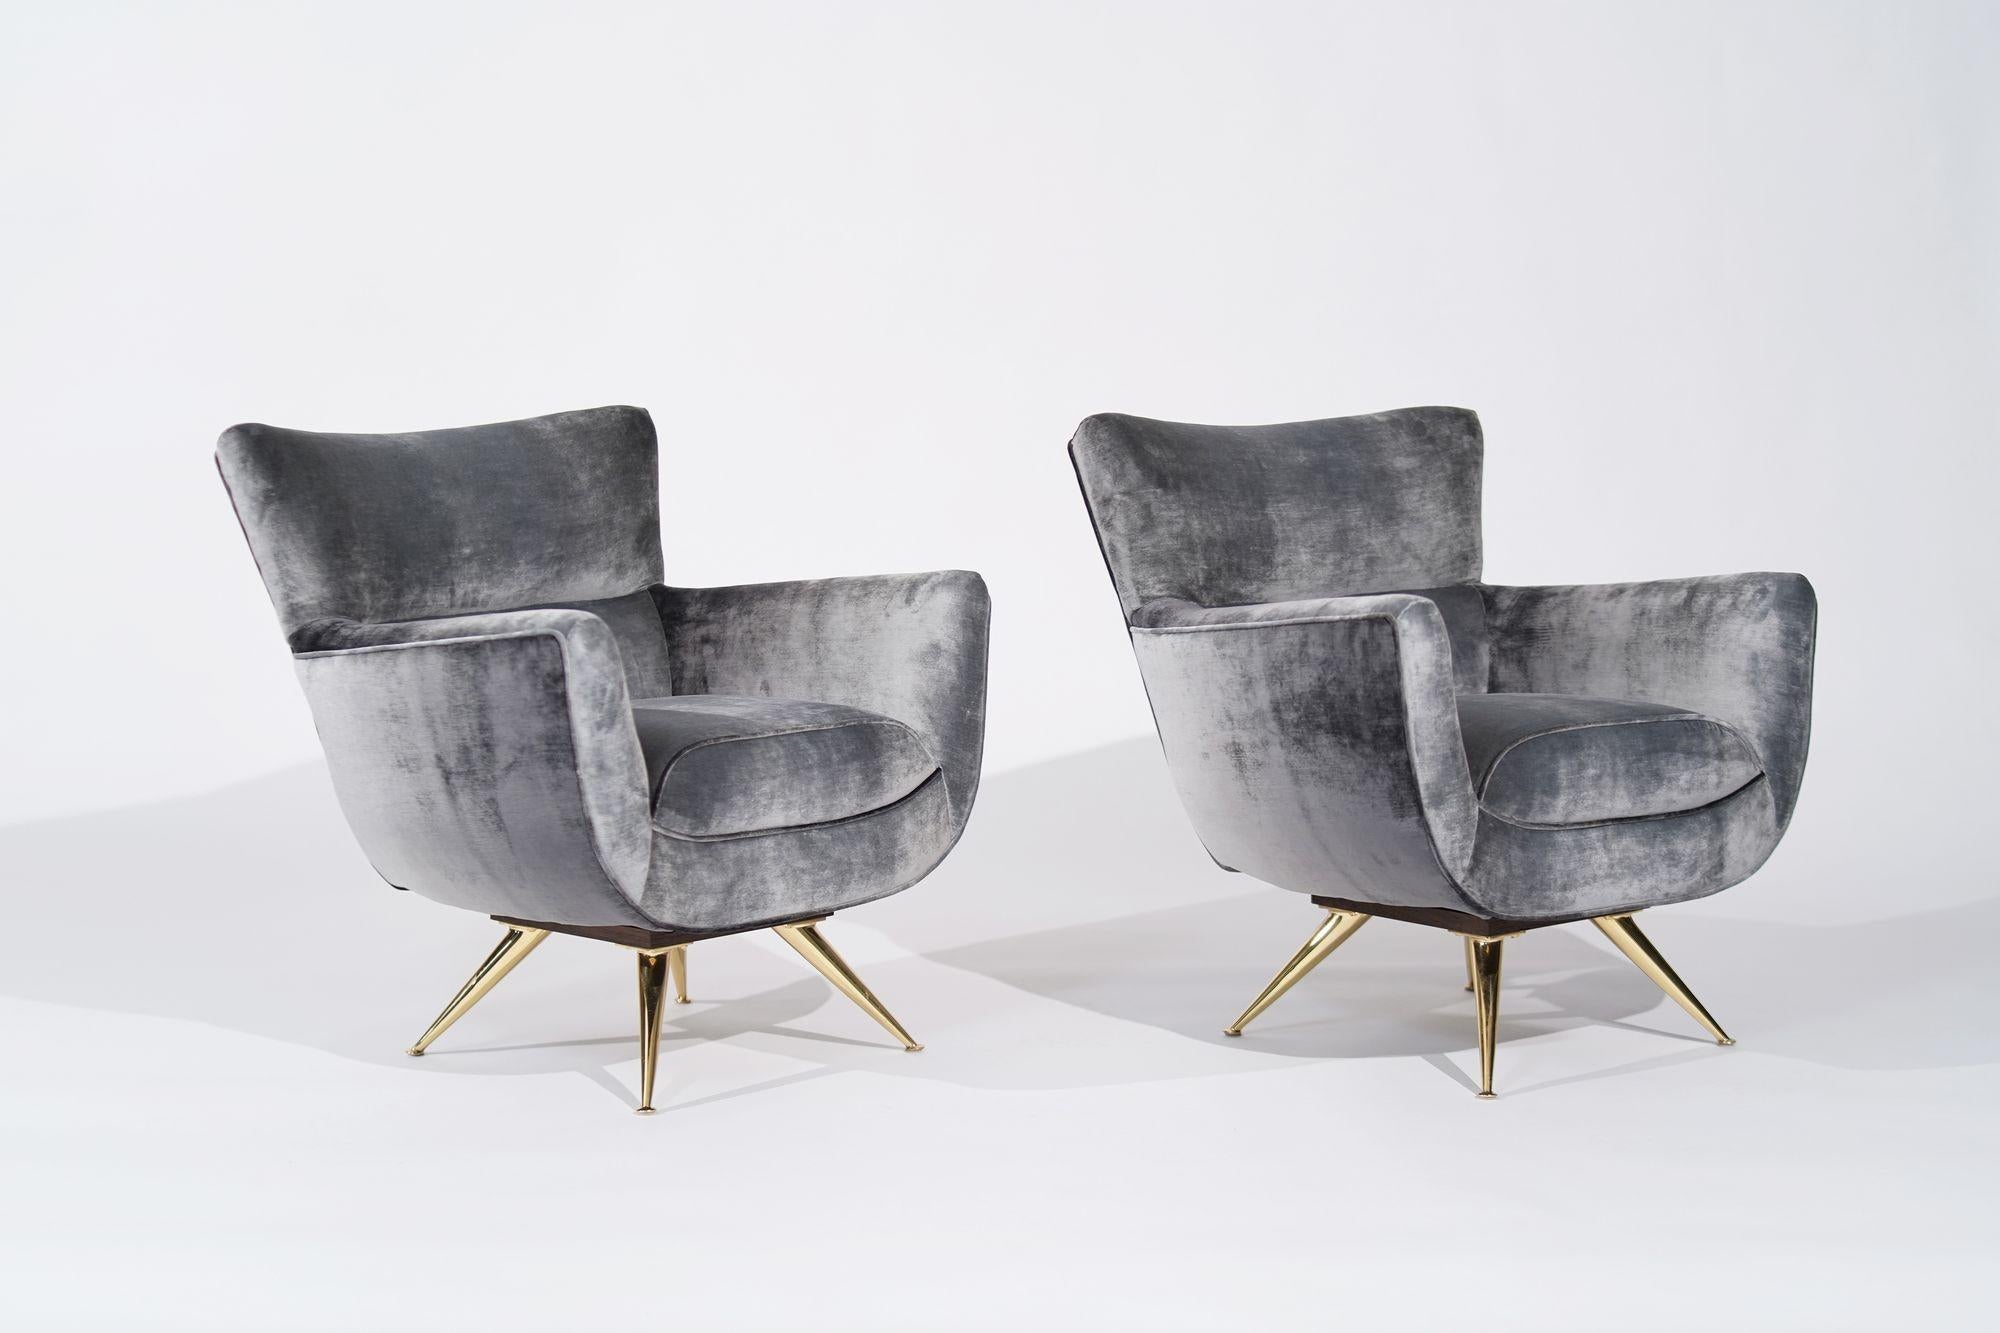 Brass Henry Glass Swivel Chairs in Distressed Silver Velvet, C. 1950s For Sale